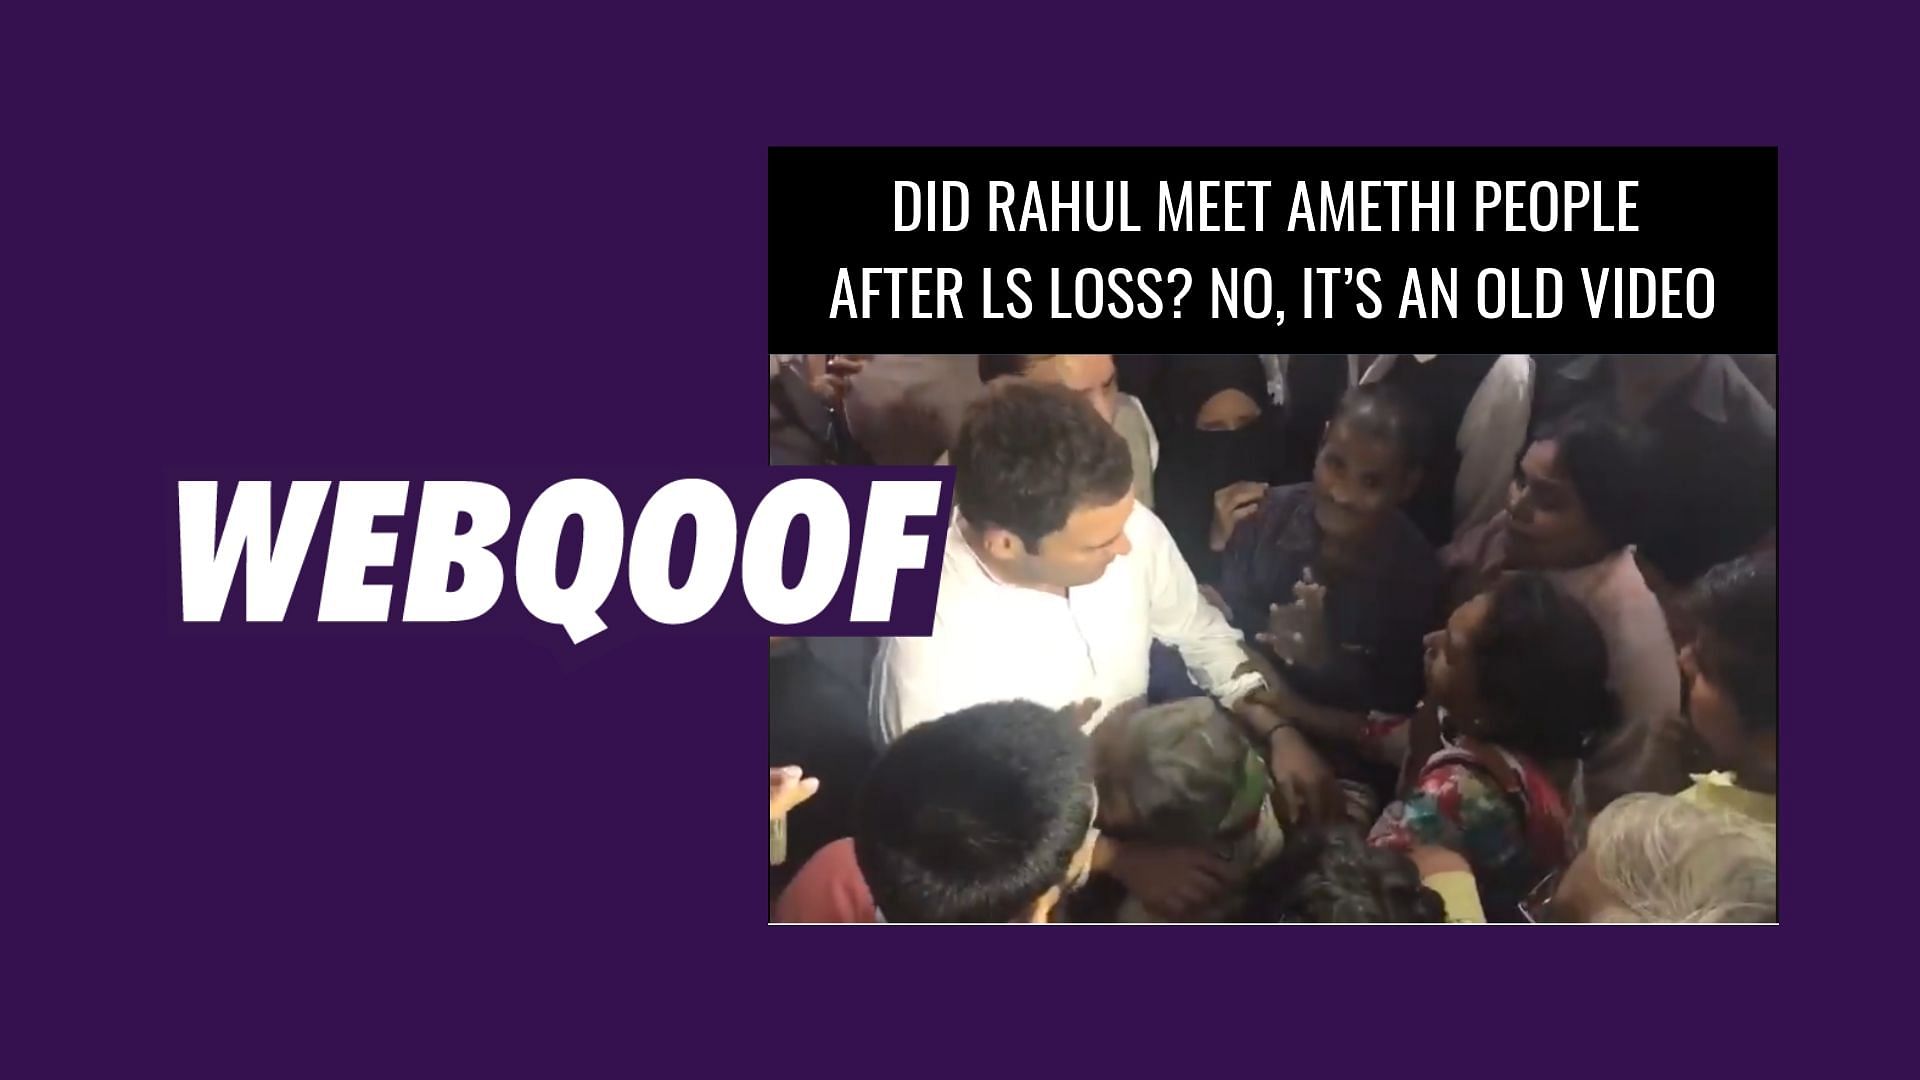 In the video Rahul Gandhi can be seen consoling an old woman in the middle of a crowd.